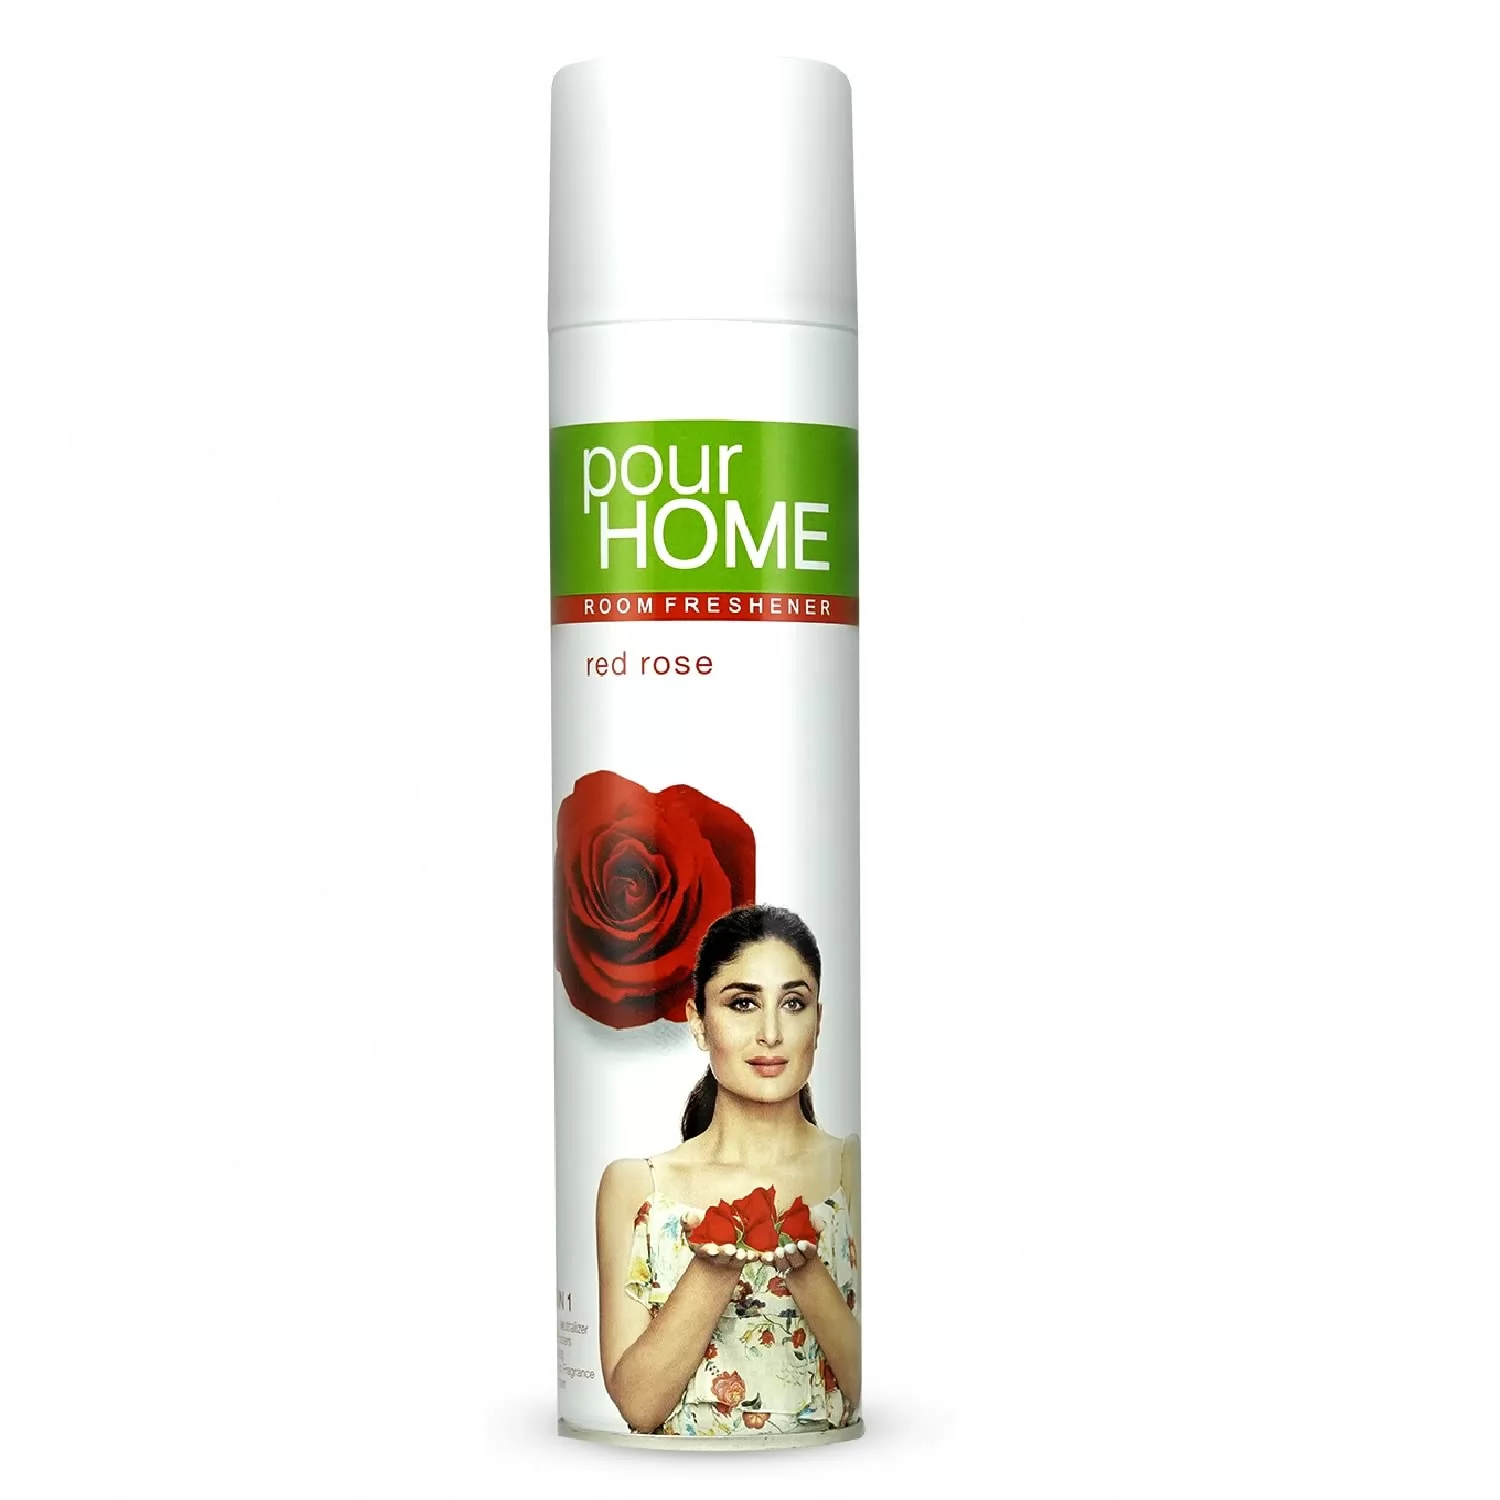 Pour Home Room Freshener Red Rose